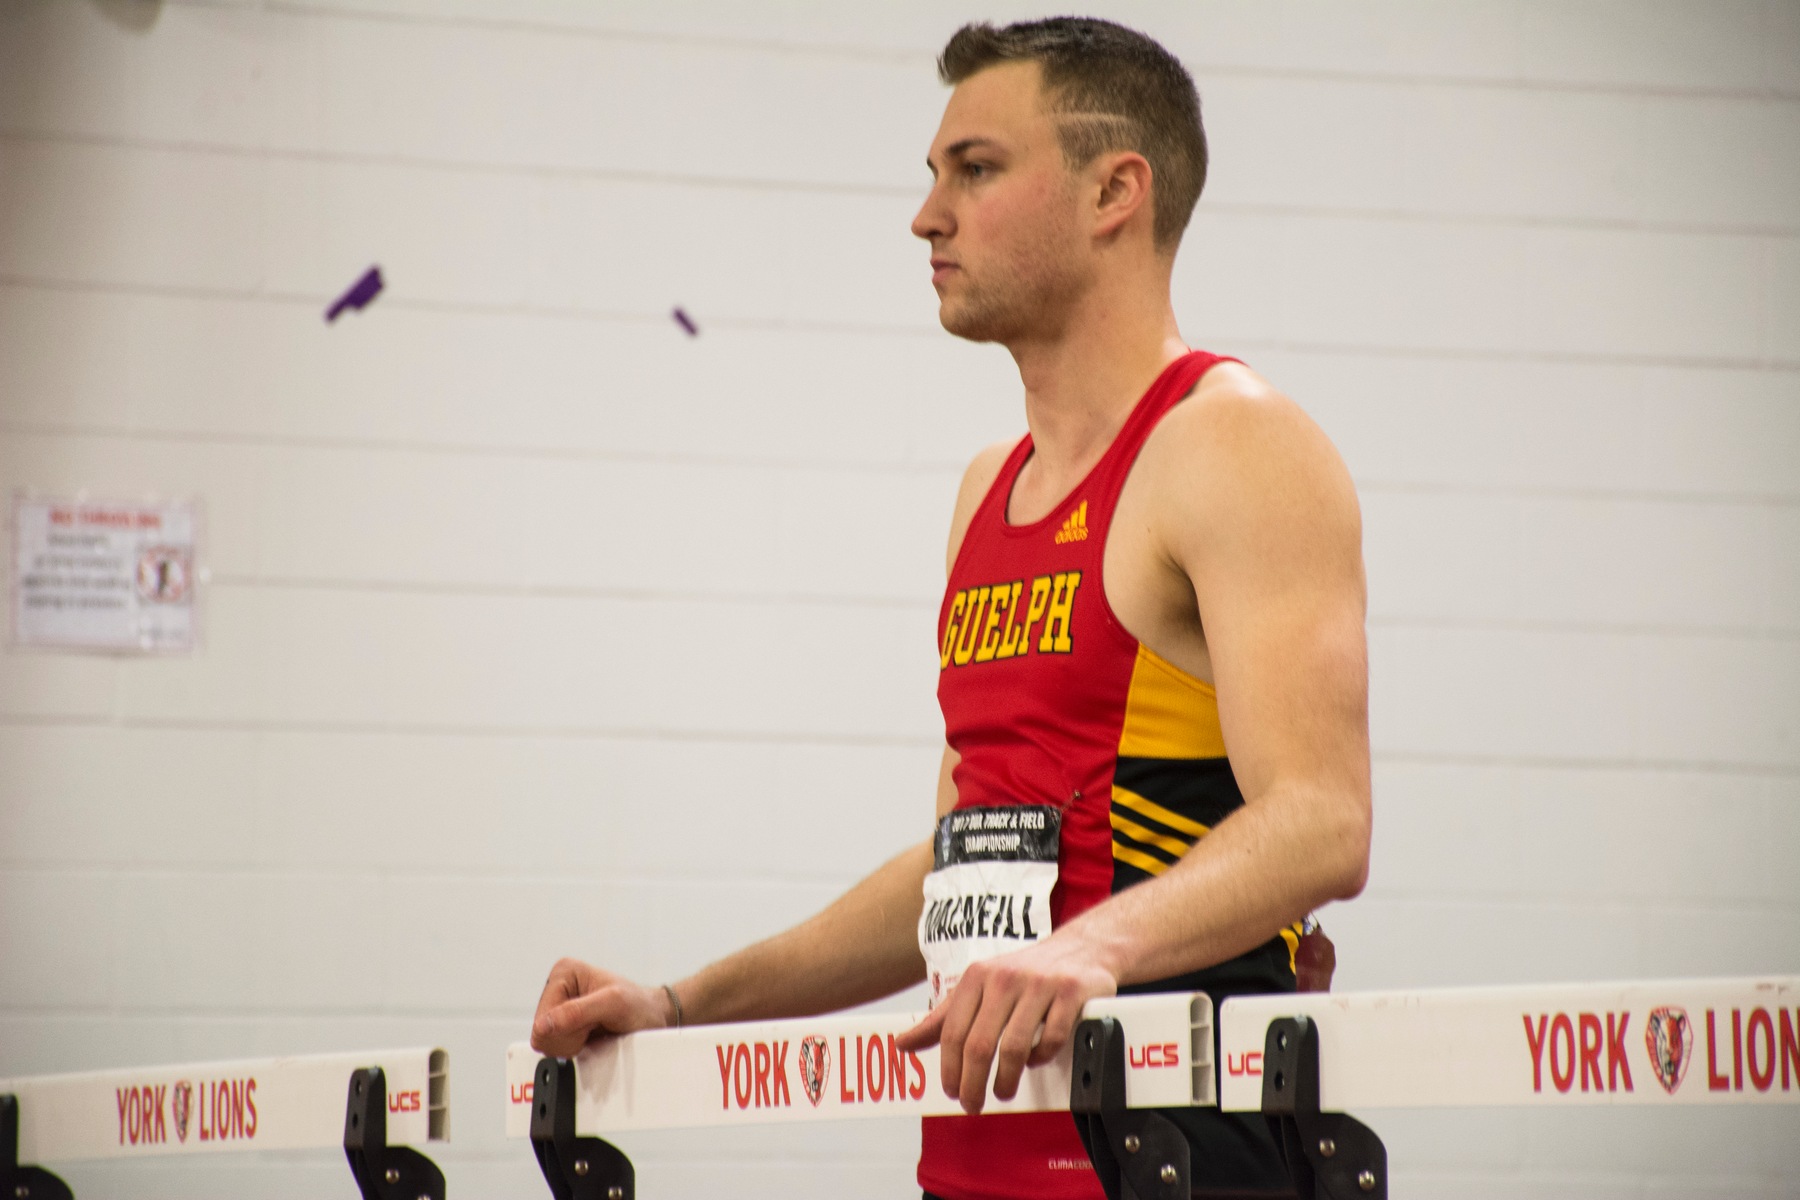 “Trust your training, be focused, give everything your body has, and leave it all on the track. If I can do that, regardless of the result, I can’t lose the race.” - Gryphons' Gregory MacNeill